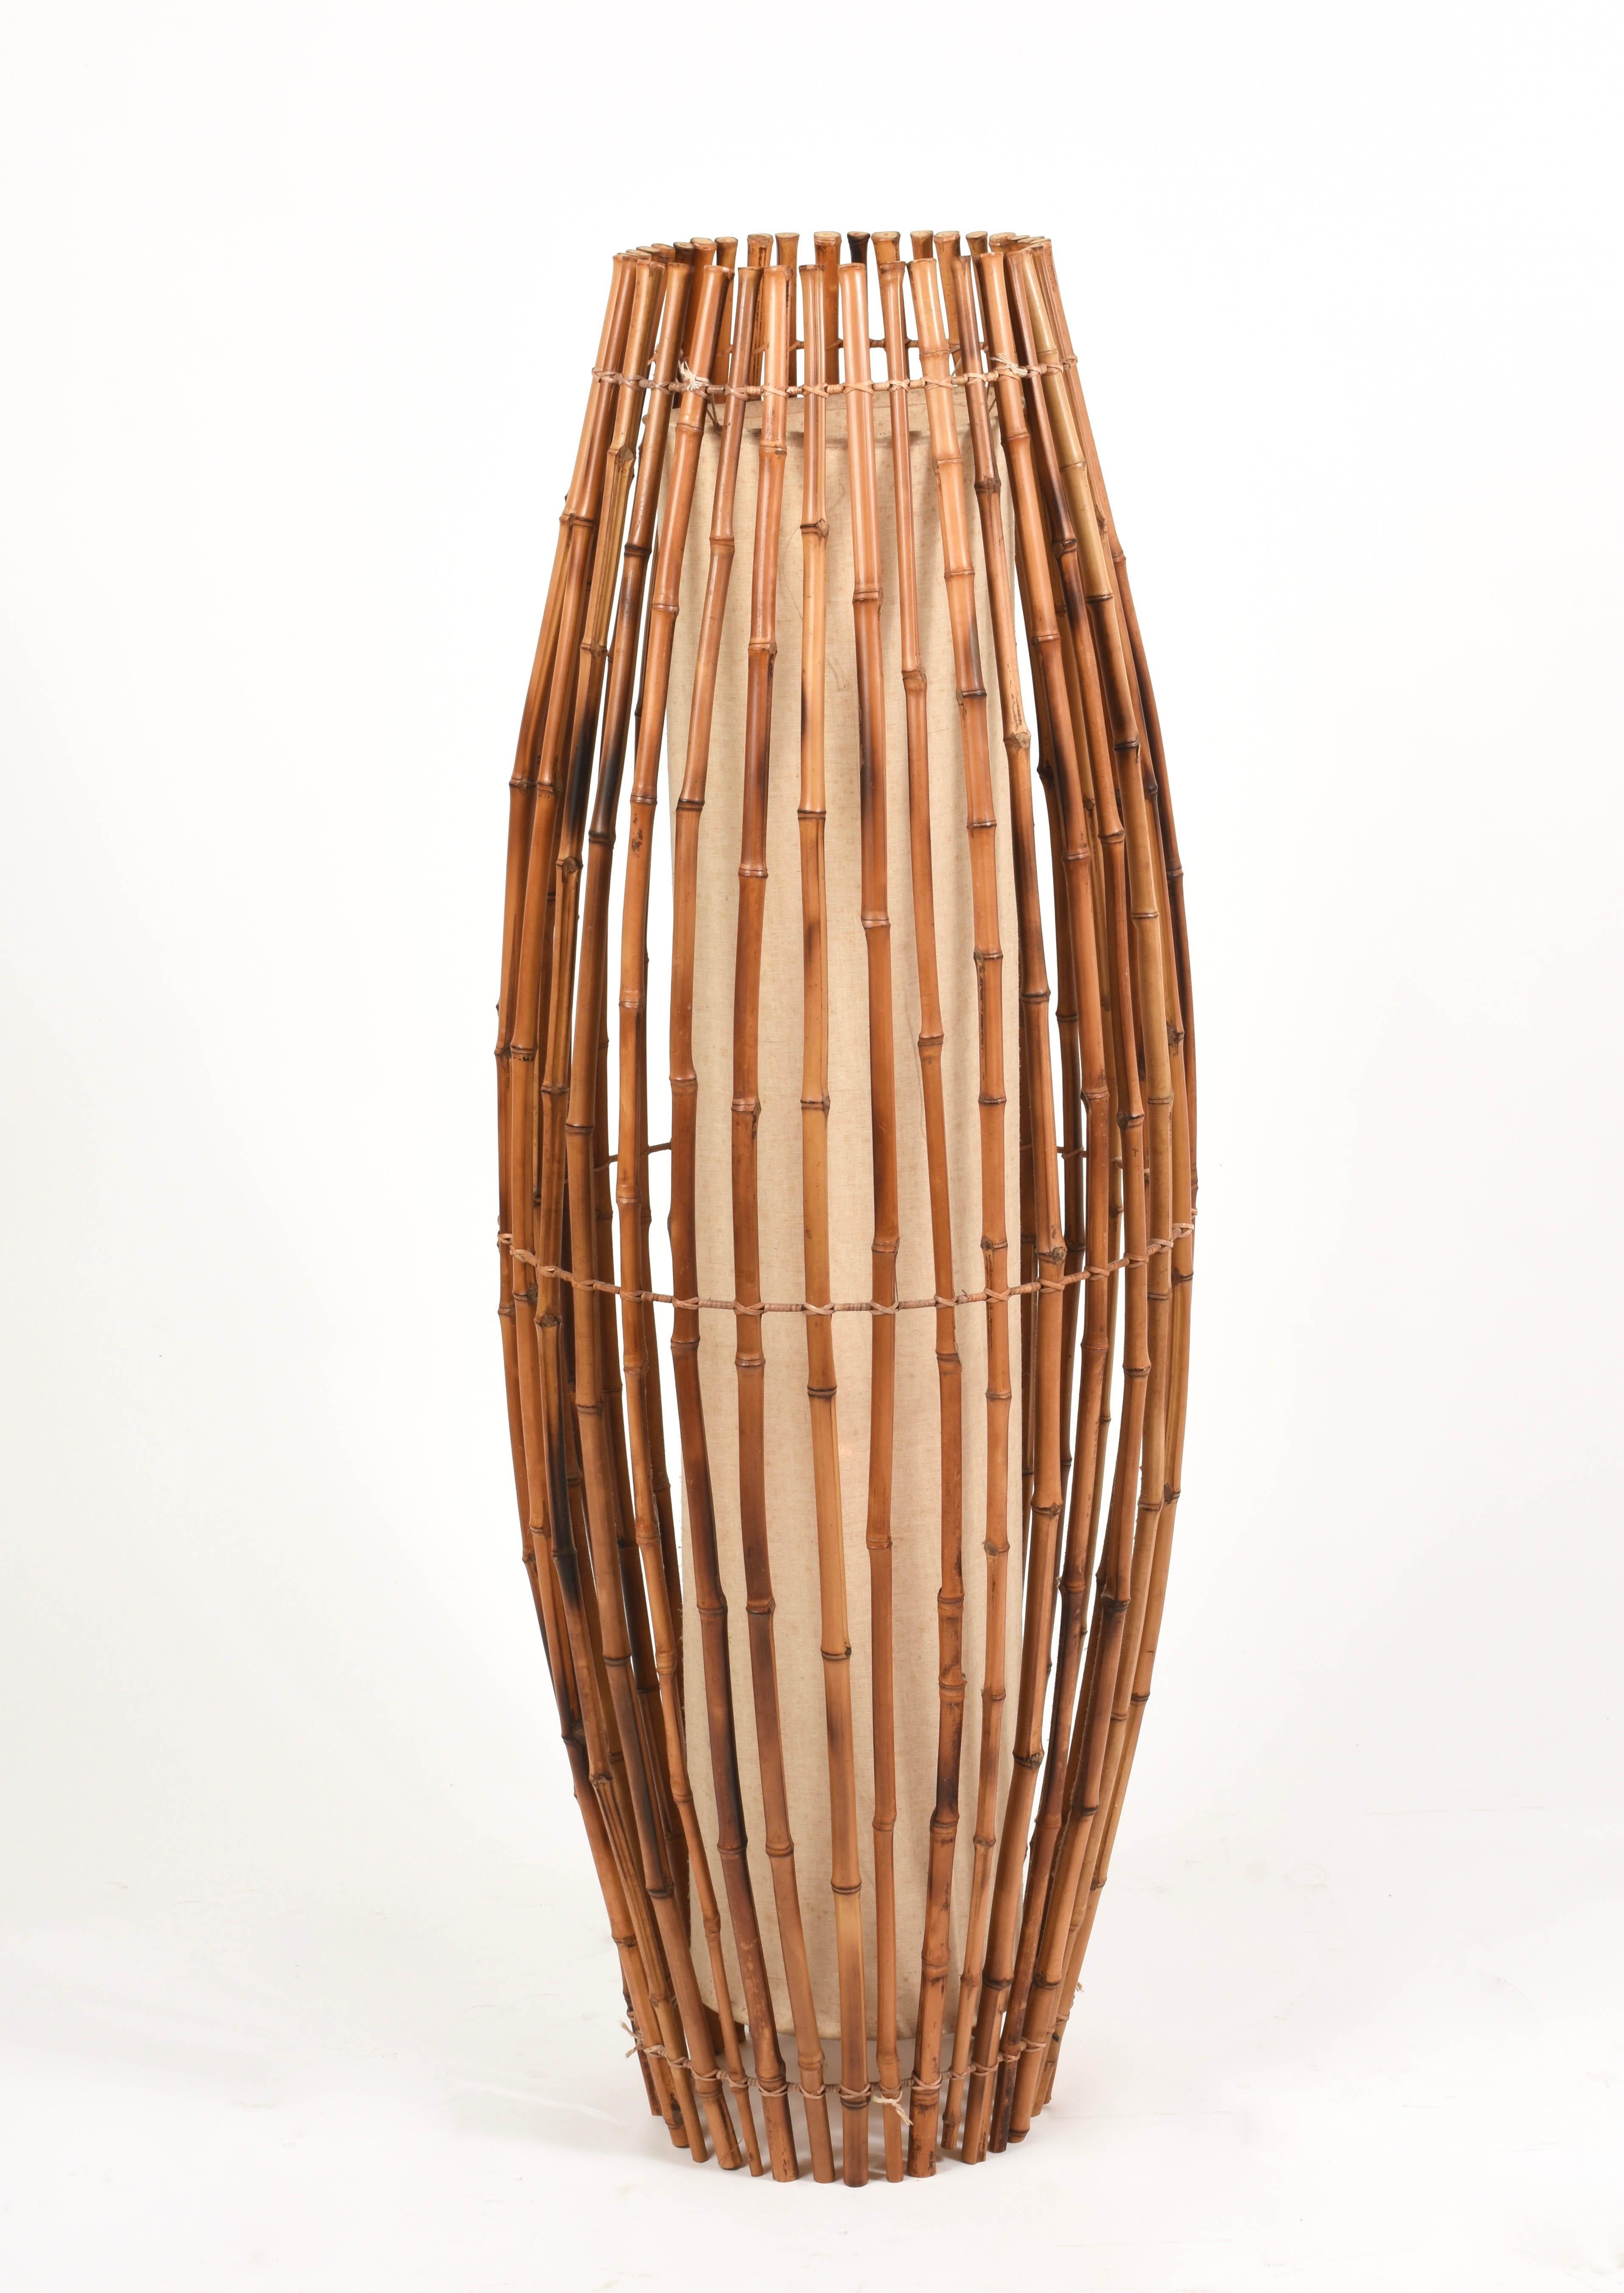 Wonderful midcentury floor lamp in the style of Franco Albini. It is a marvelous piece produced in Italy during 1960s.

It is made of bamboo and rattan and it has the shape of two cones narrowing in the centre.

This item is perfect for a